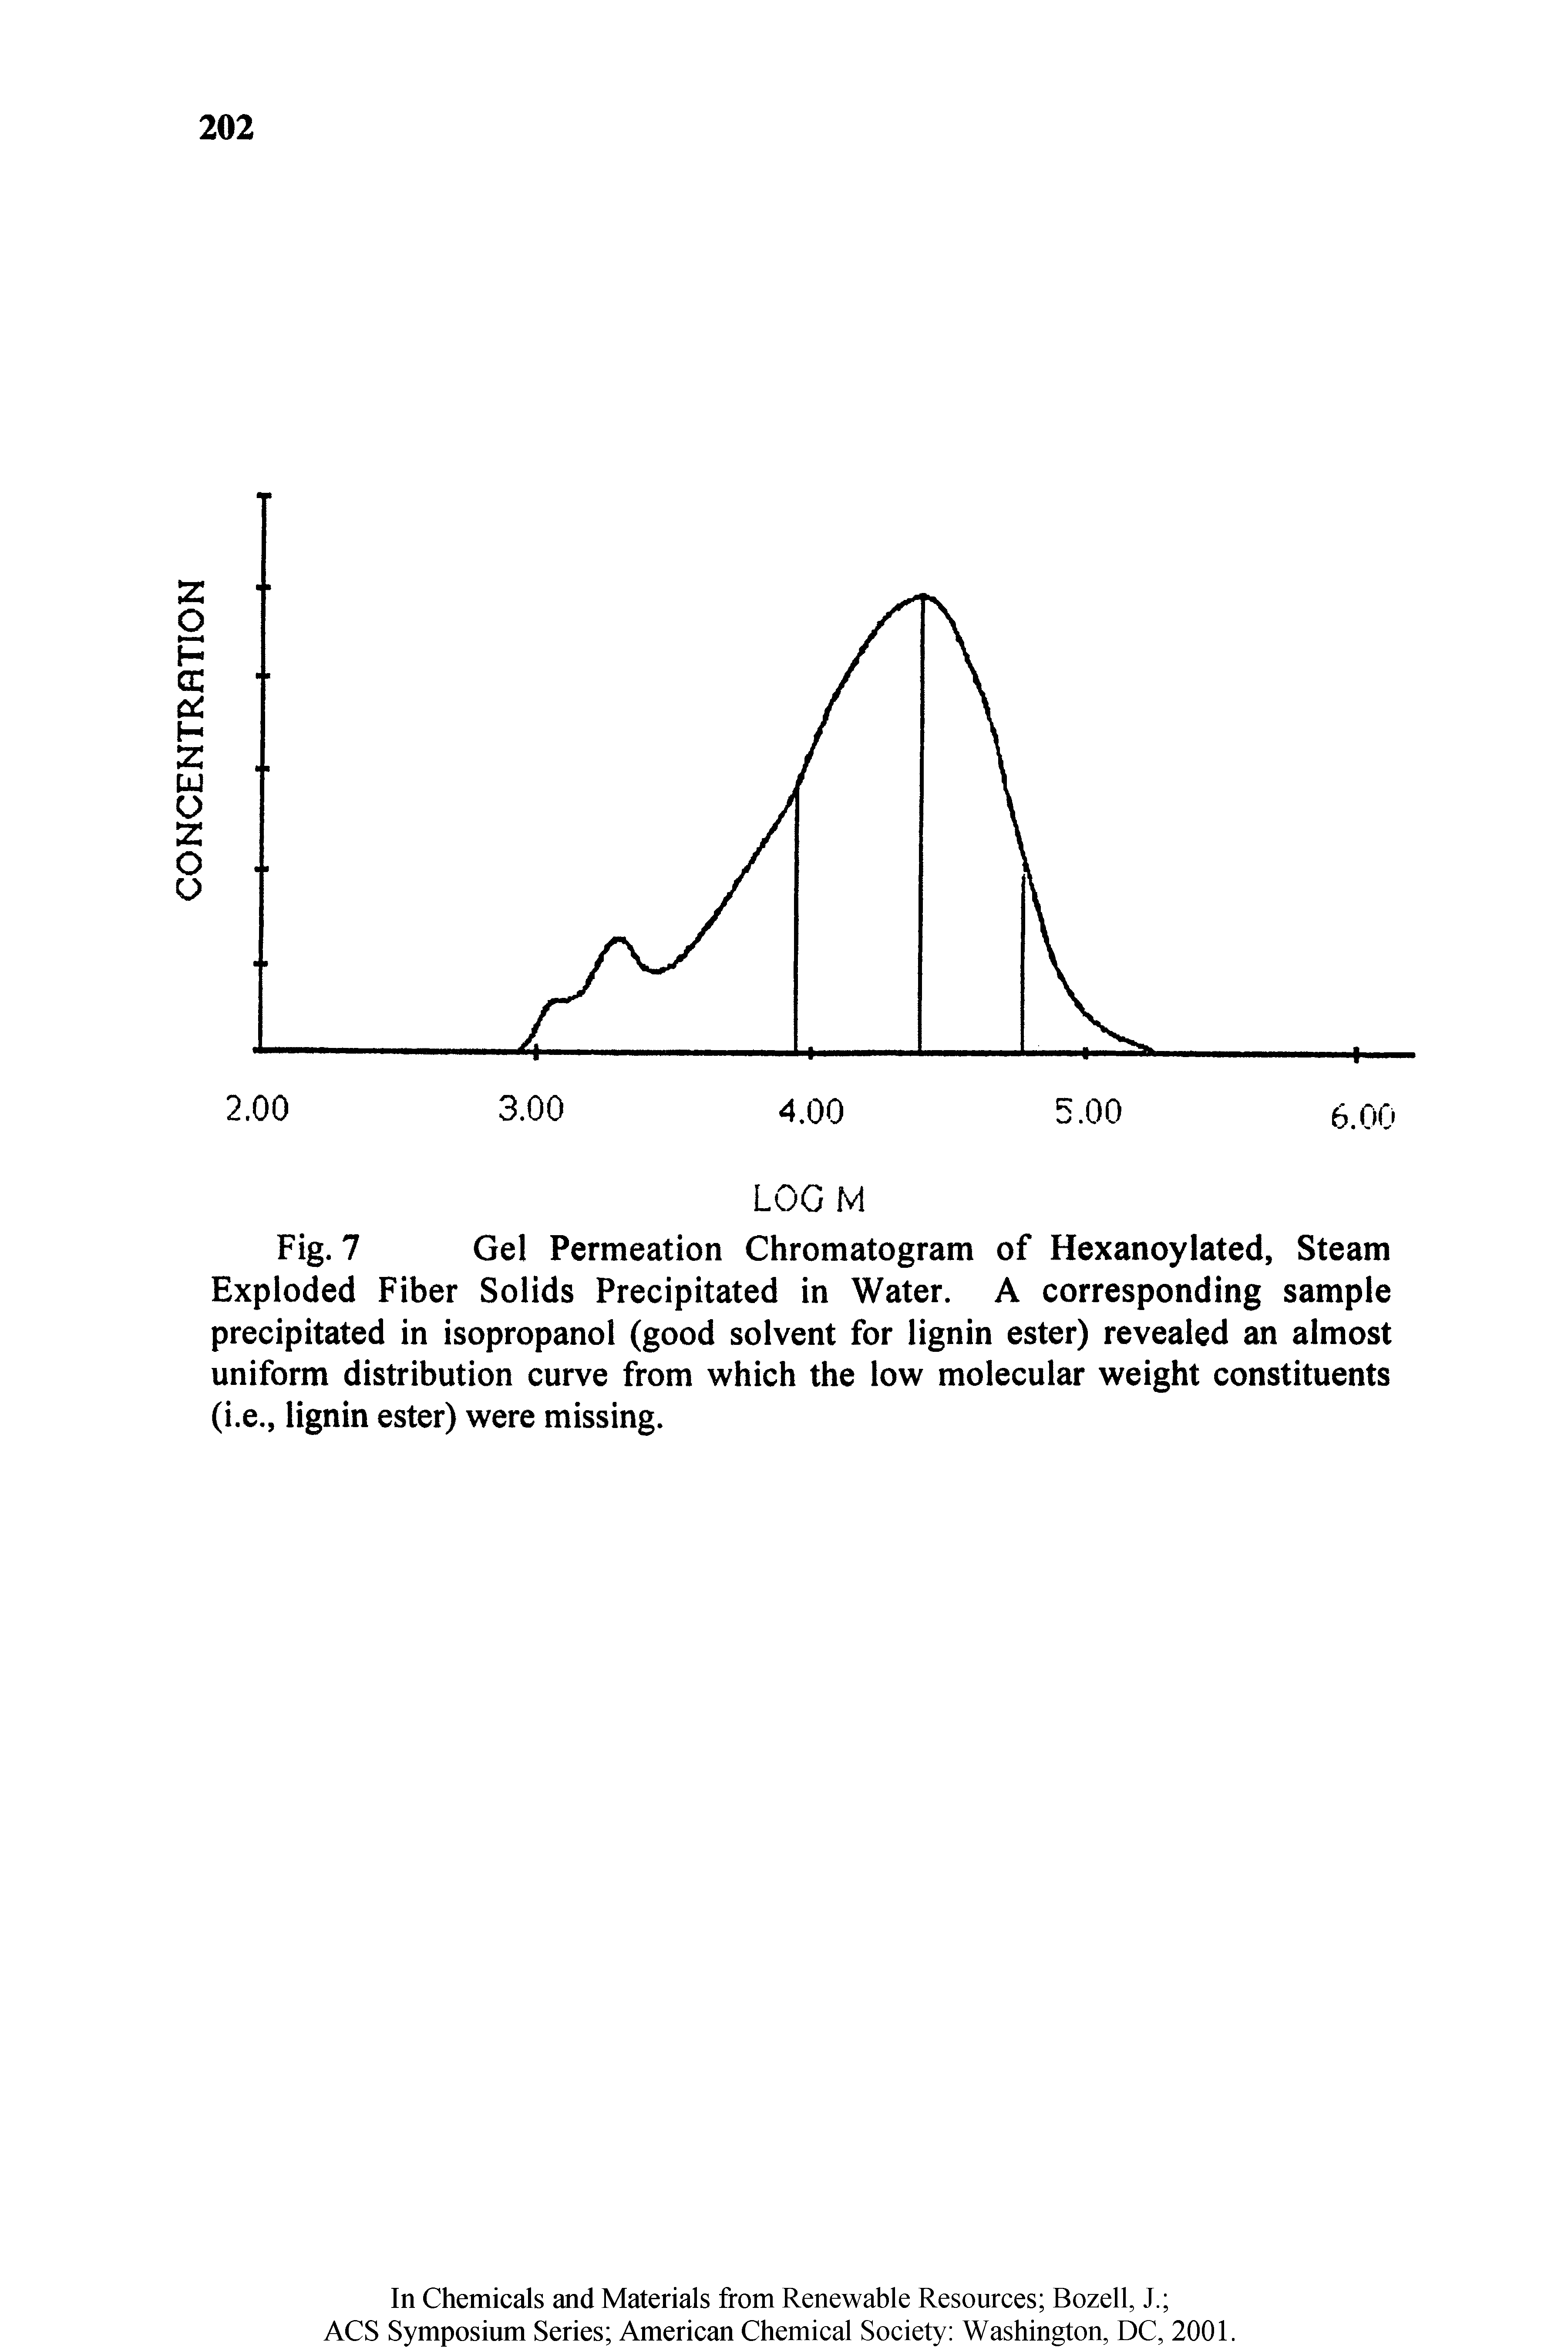 Fig. 7 Gel Permeation Chromatogram of Hexanoylated, Steam Exploded Fiber Solids Precipitated in Water. A corresponding sample precipitated in isopropanol (good solvent for lignin ester) revealed an almost uniform distribution curve from which the low molecular weight constituents (i.e., lignin ester) were missing.